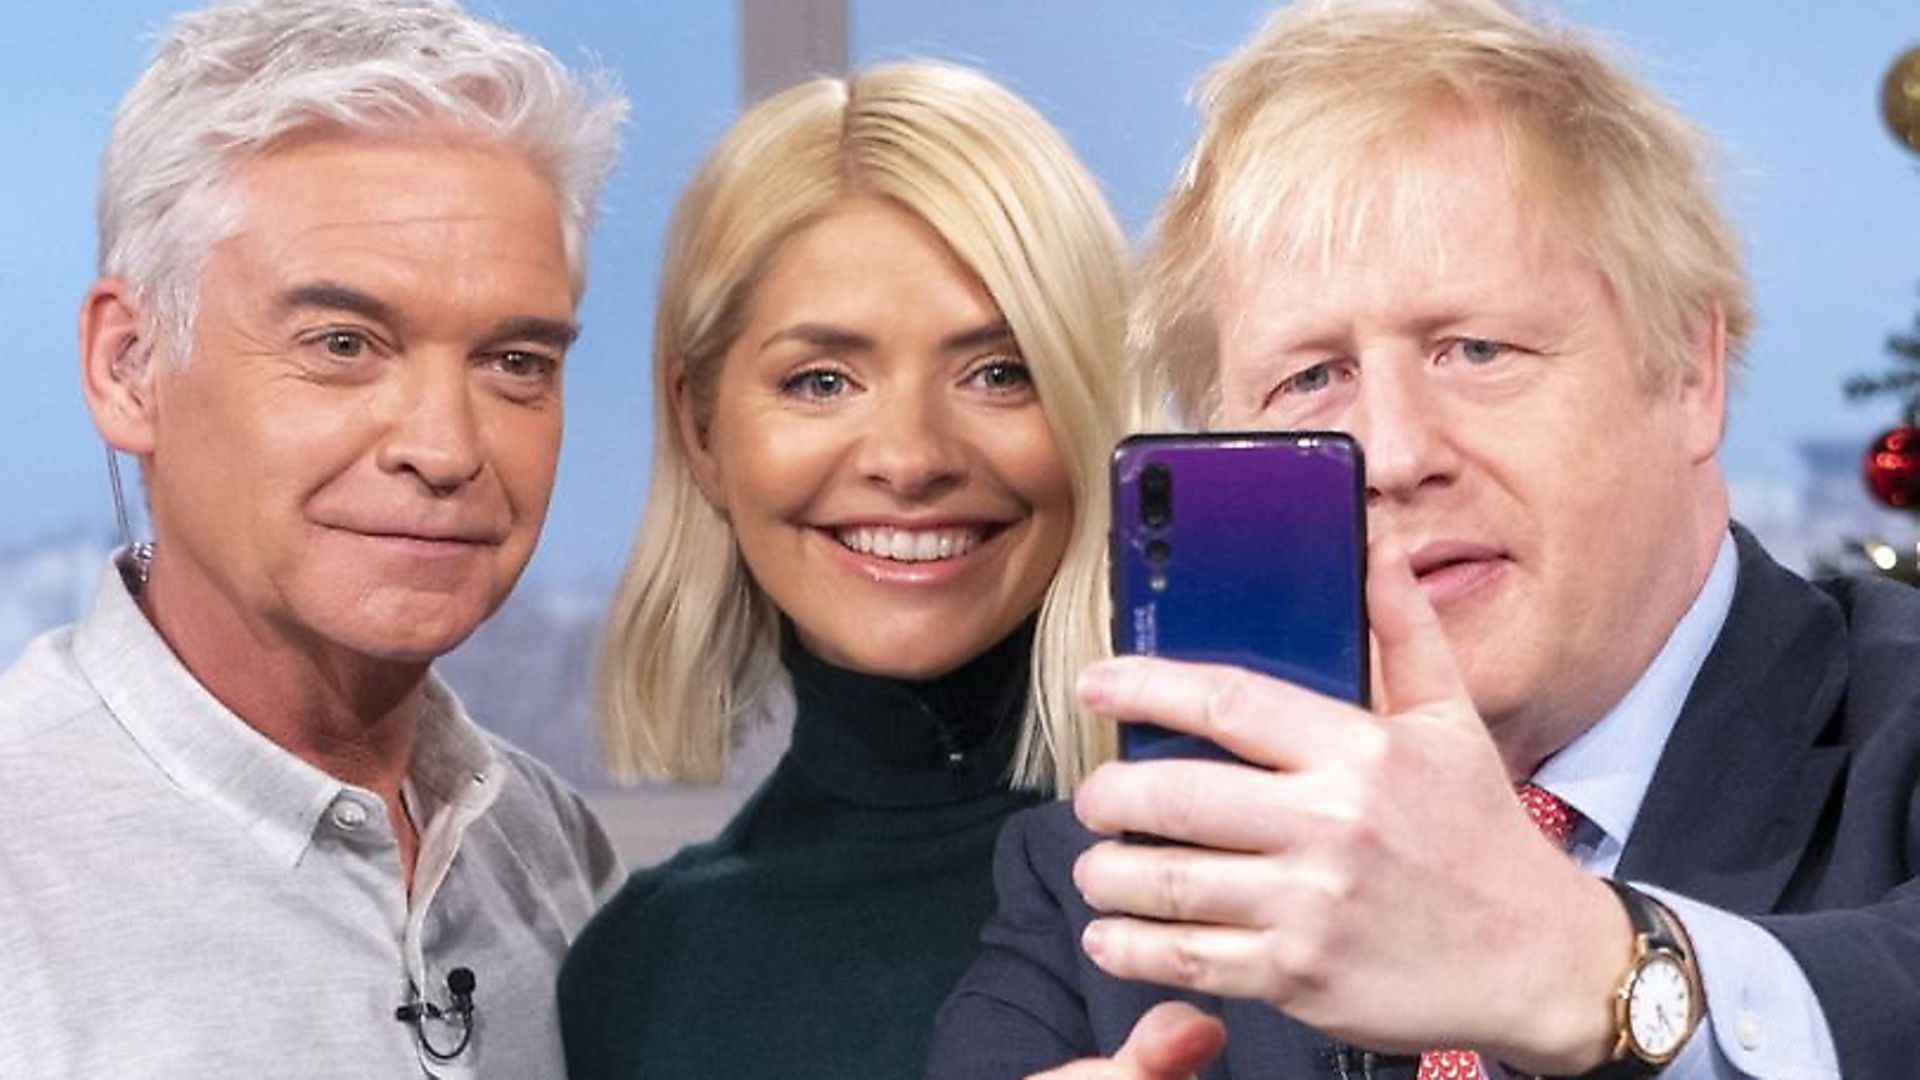 Phillip Schofield, Holly Willoughby and Boris Johnson using what appears to be a Huwaei phone for a selfie after the prime minister's interview on ITV's This Morning. Picture: ITV - Credit: ITV